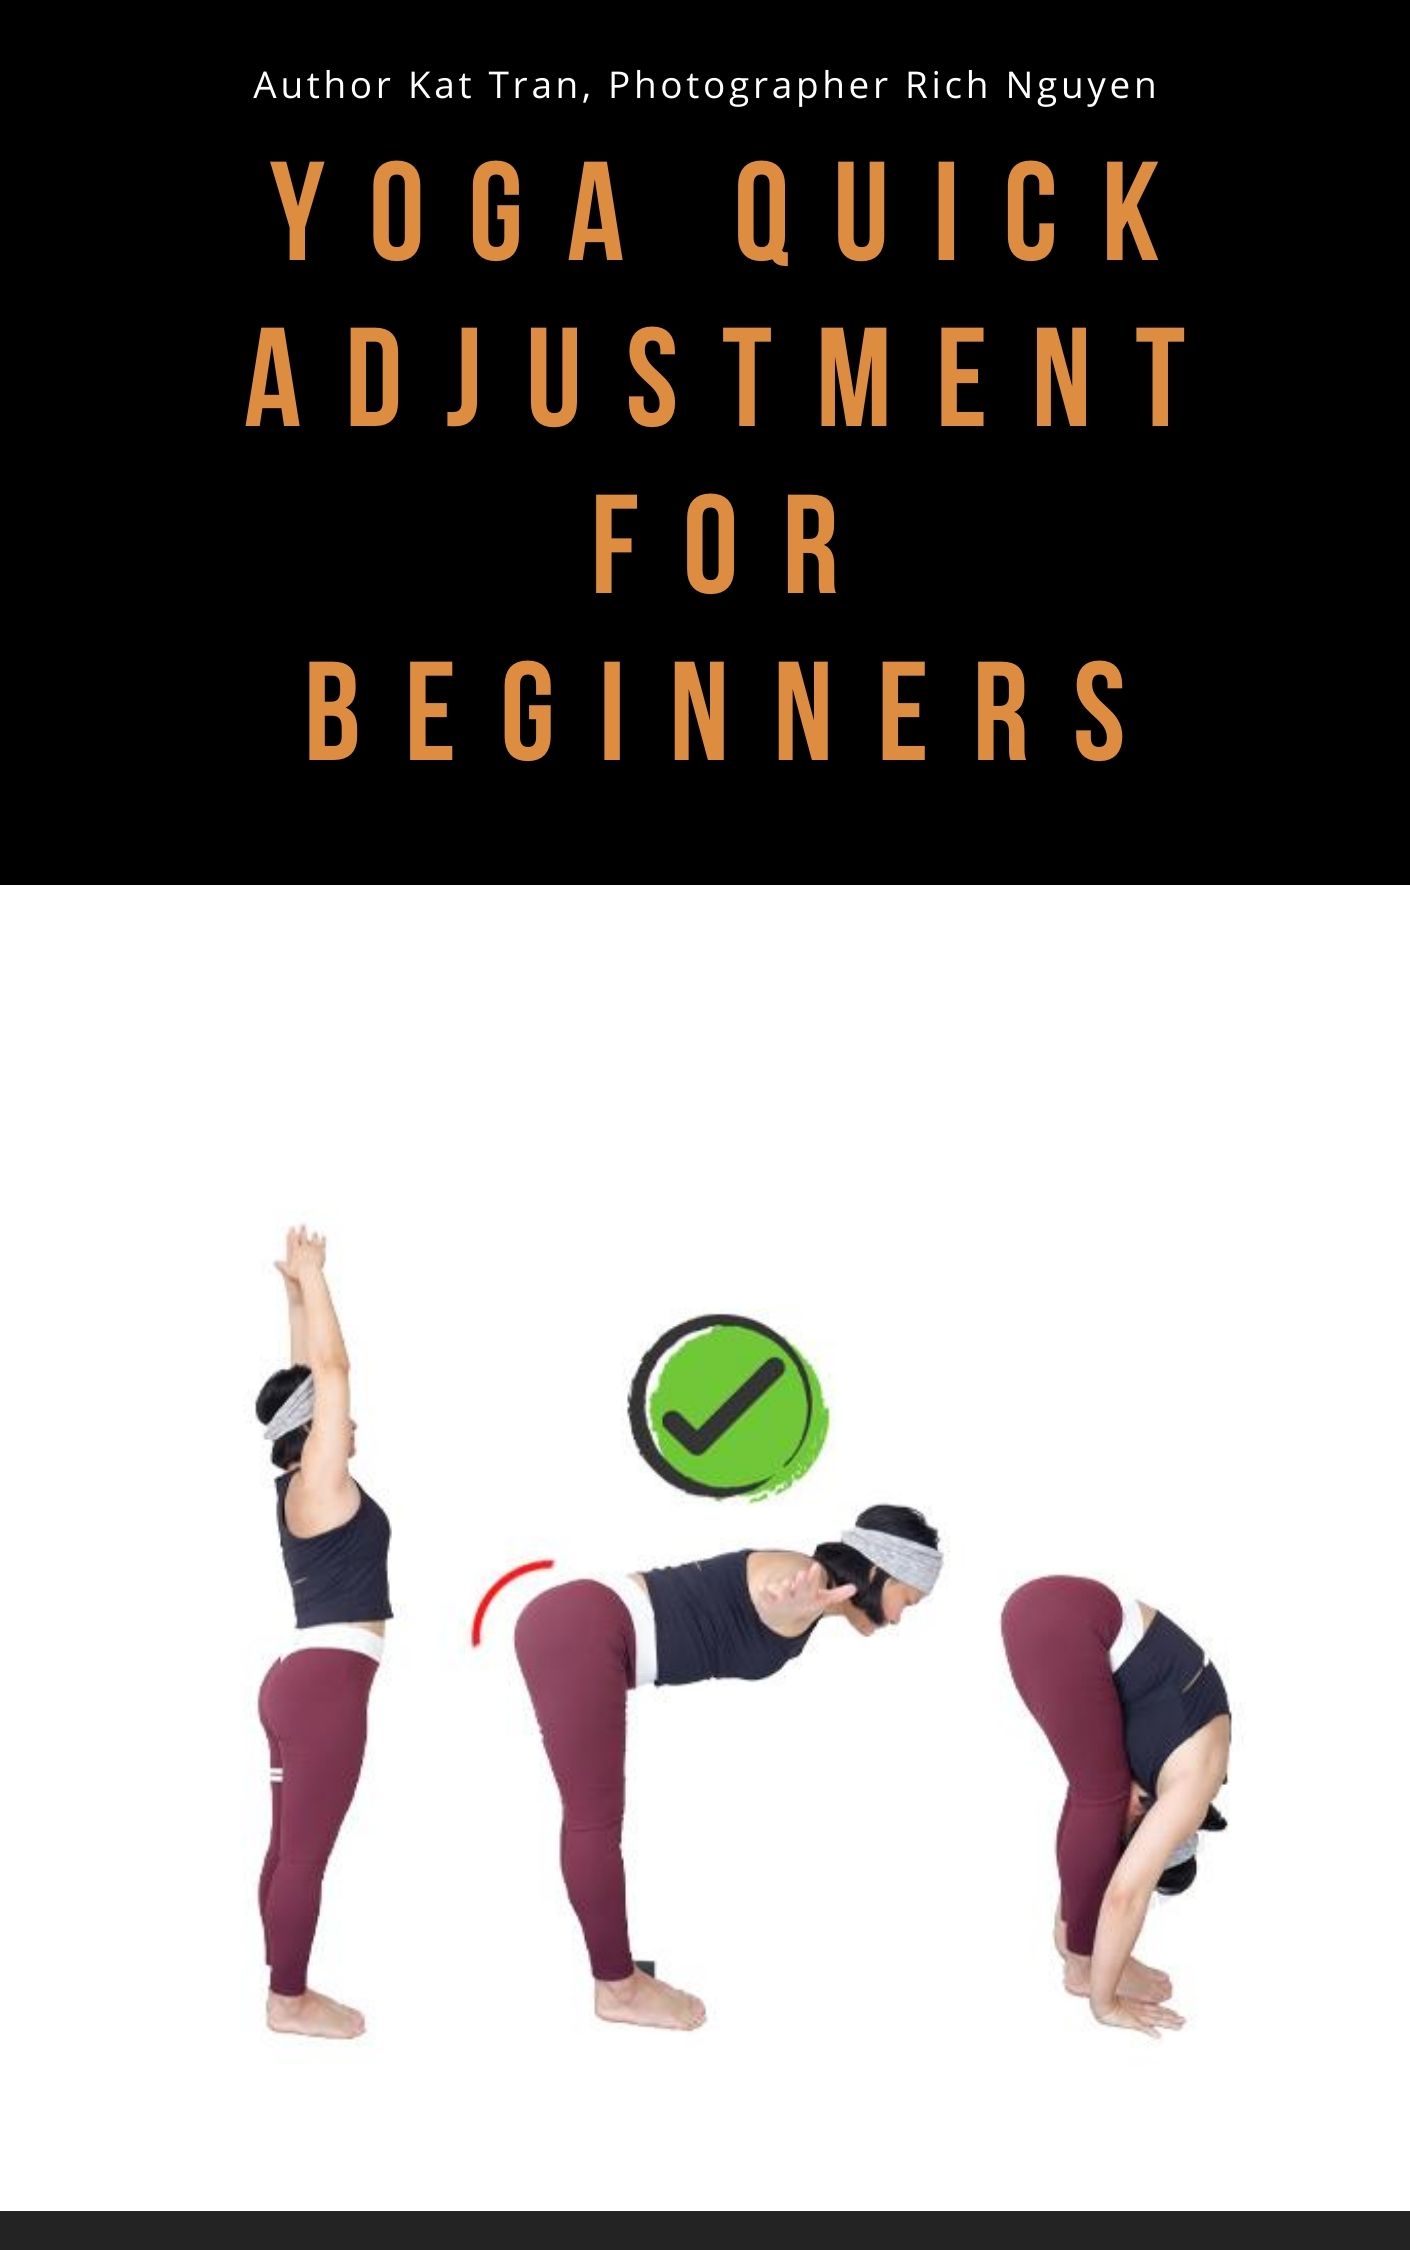 FREE: Yoga quick adjustment for beginners by Kat Tran